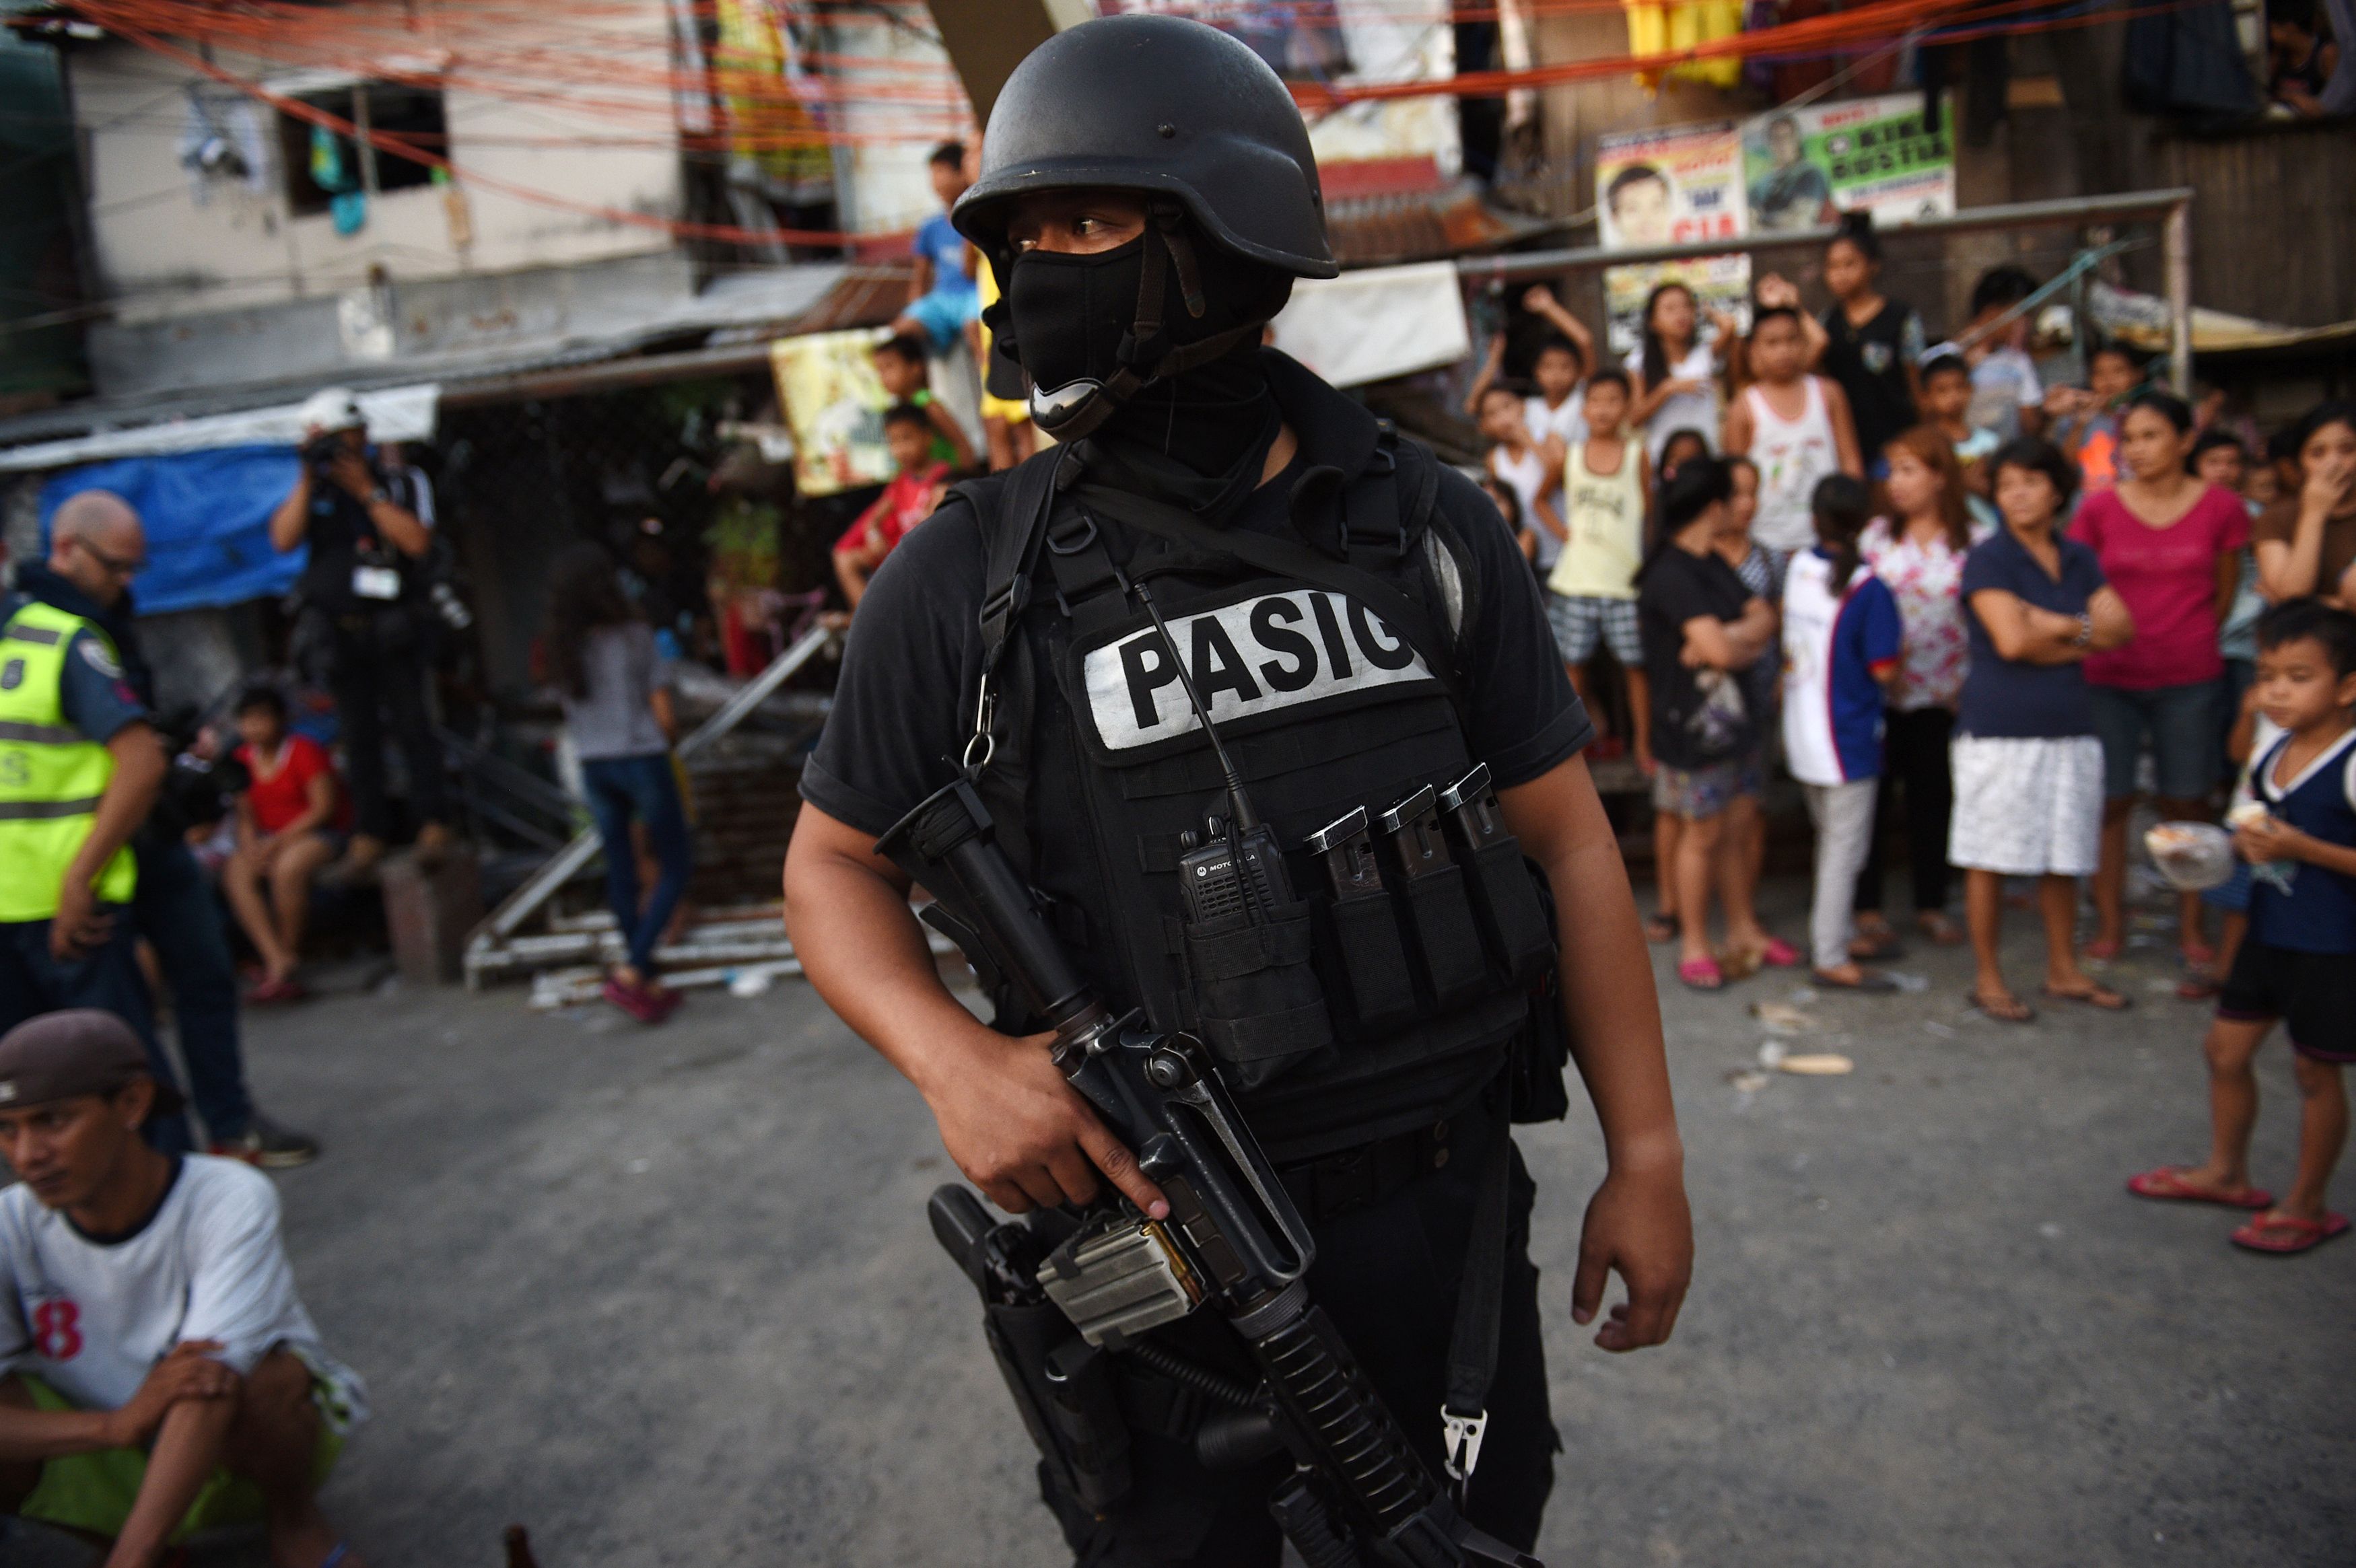 A member of the Special Weapons and Tactics (SWAT) team stands guard while residents look on during an antidrug operation at an informal settlers area in Manila on Nov. 9, 2016. Since President Rodrigo Duterte took office on June 30, his war on drugs and other crimes have claimed more than 4,100 lives, according to official figures (Ted Aljibe—AFP/Getty Images)